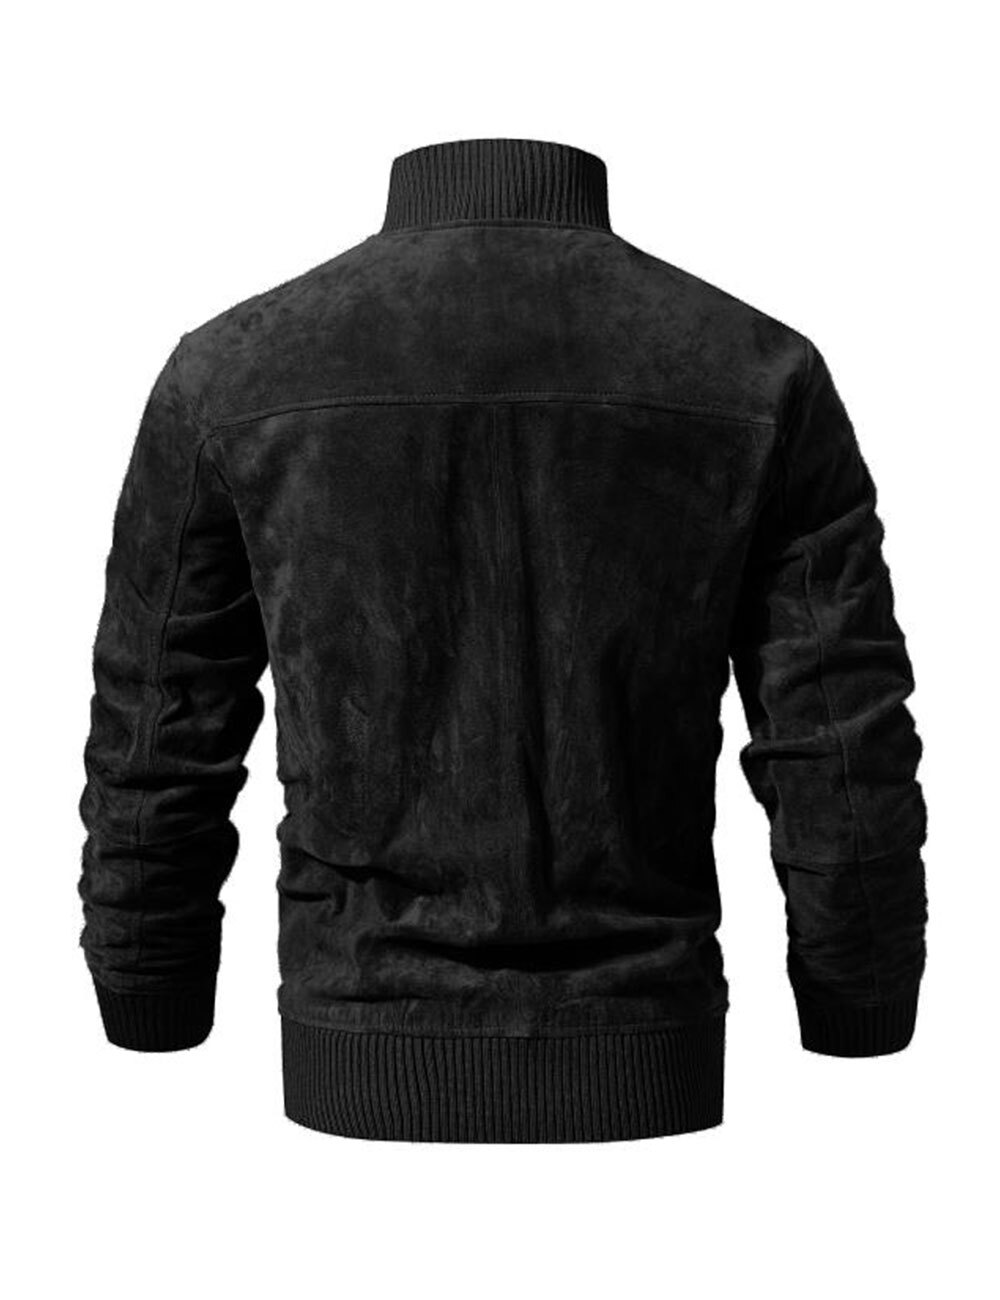 FLAVOR Men's Real Leather Jacket Pigskin Genuine Leather Coat With Rib Cuff Standing Collar 15-23B 